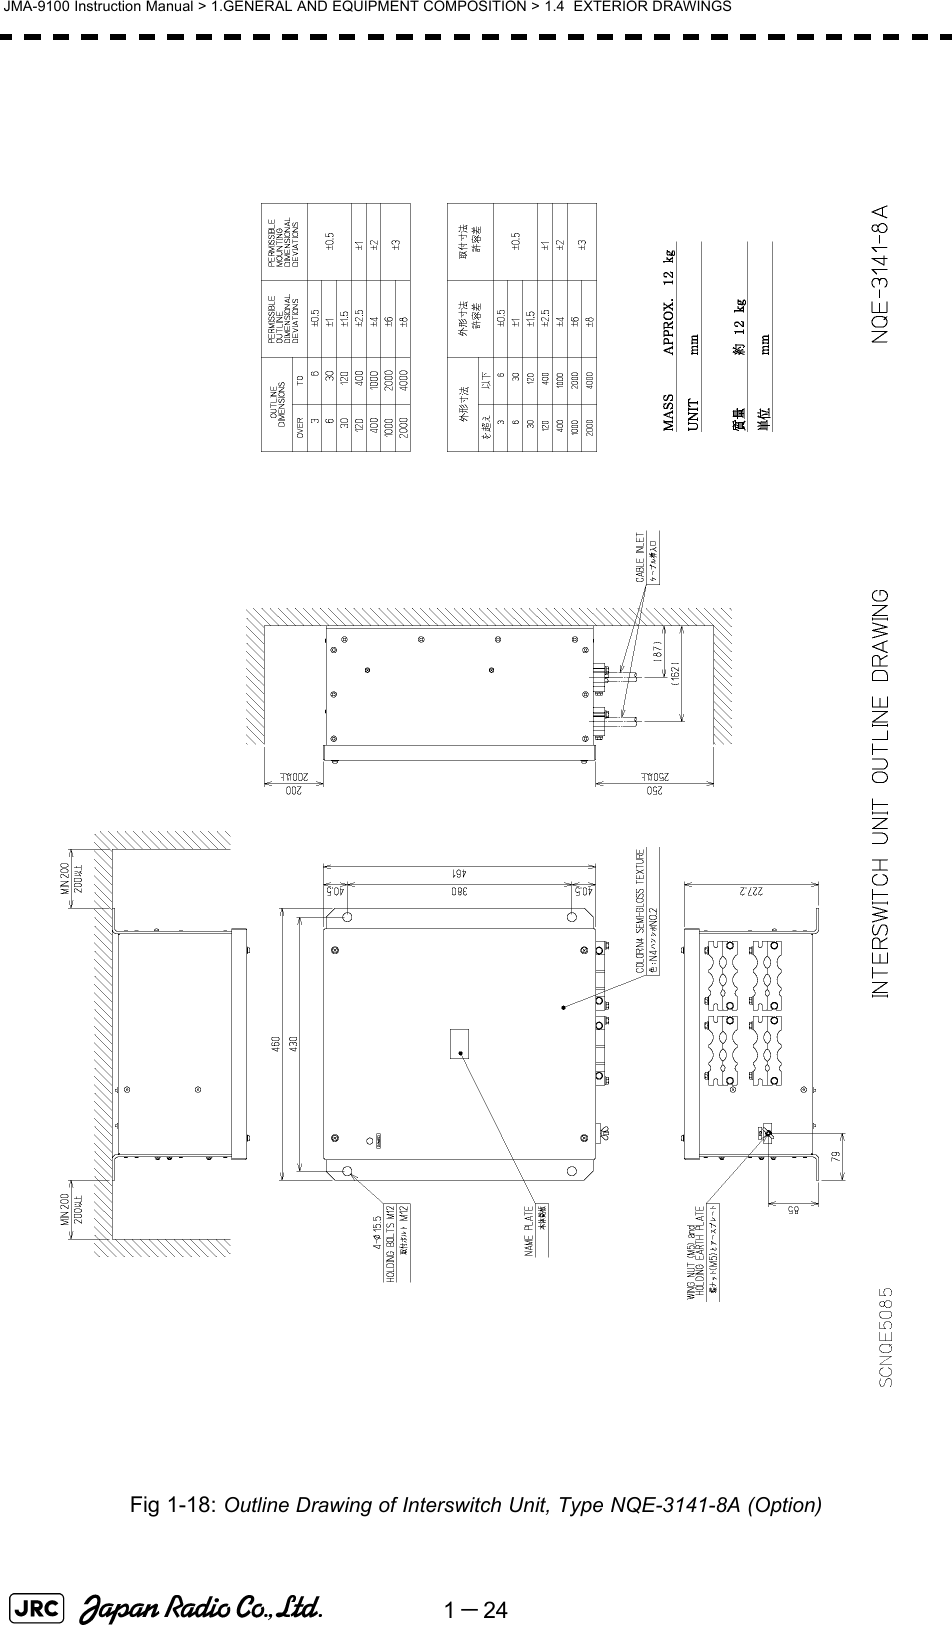 1－24JMA-9100 Instruction Manual &gt; 1.GENERAL AND EQUIPMENT COMPOSITION &gt; 1.4  EXTERIOR DRAWINGSFig 1-18: Outline Drawing of Interswitch Unit, Type NQE-3141-8A (Option)